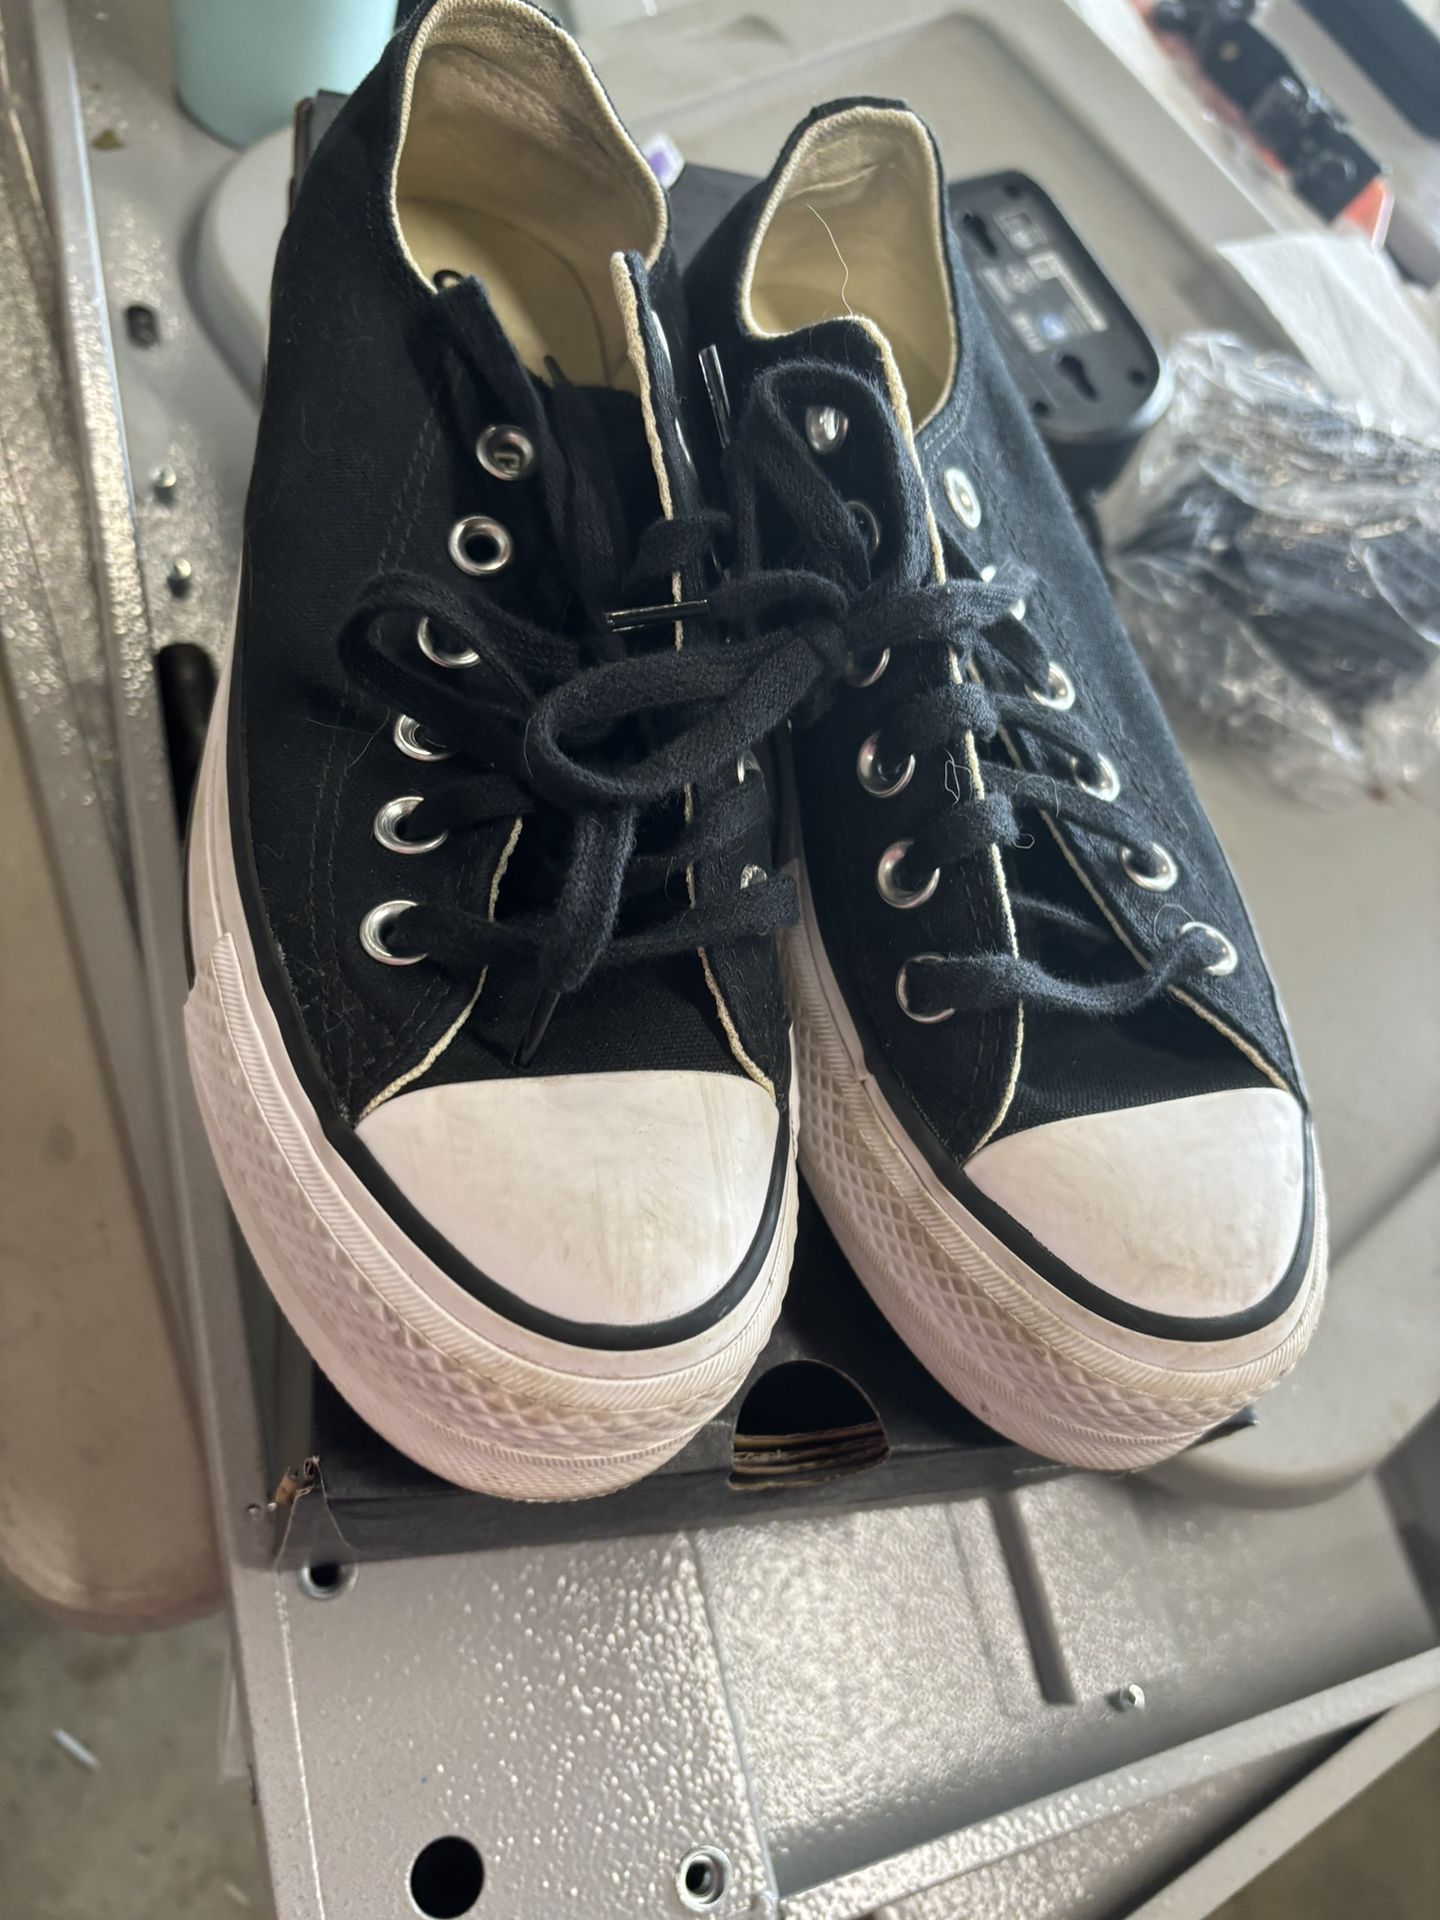 Converse High  Tops Size 6.5 